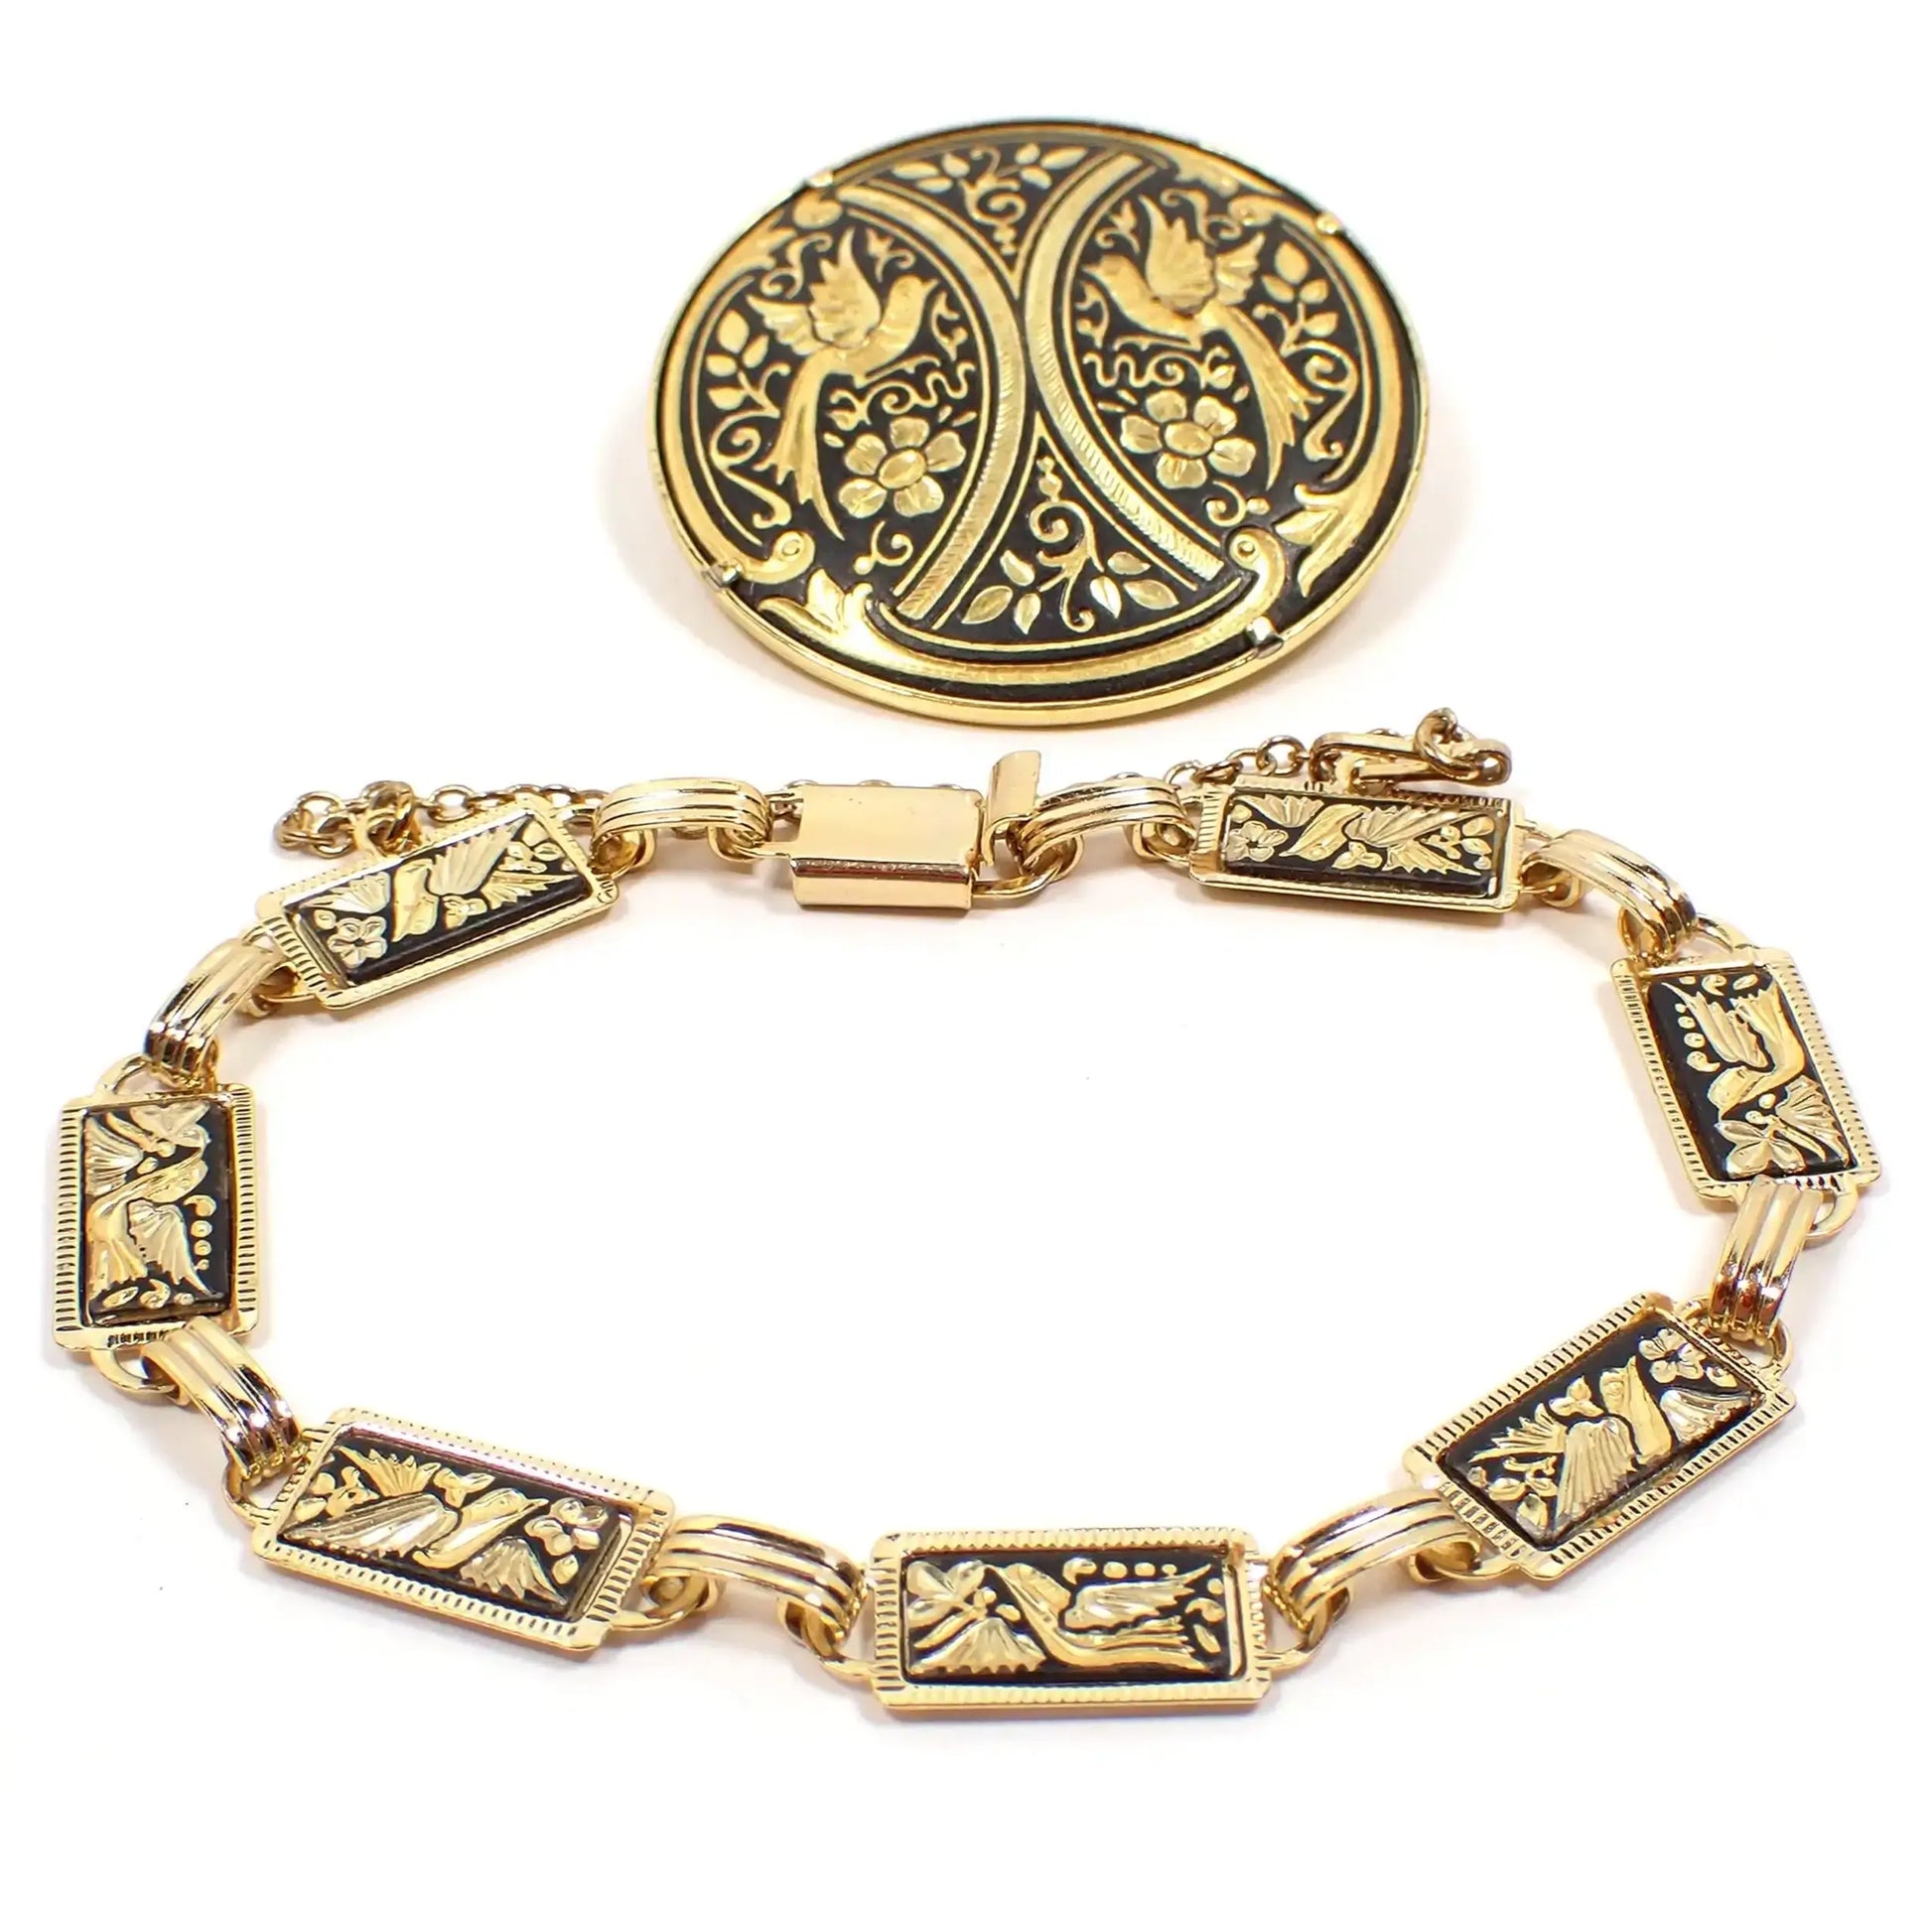 Photo of retro vintage Midas of Spain Damascene jewelry set. There is a link bracelet at the bottom with gold tone metal. The links are black with birds and flowers etched in different shades of gold tone metal. There is a box clasp at the end. Above the bracelet is a matching round brooch with bird and floral design in black and gold color as well.